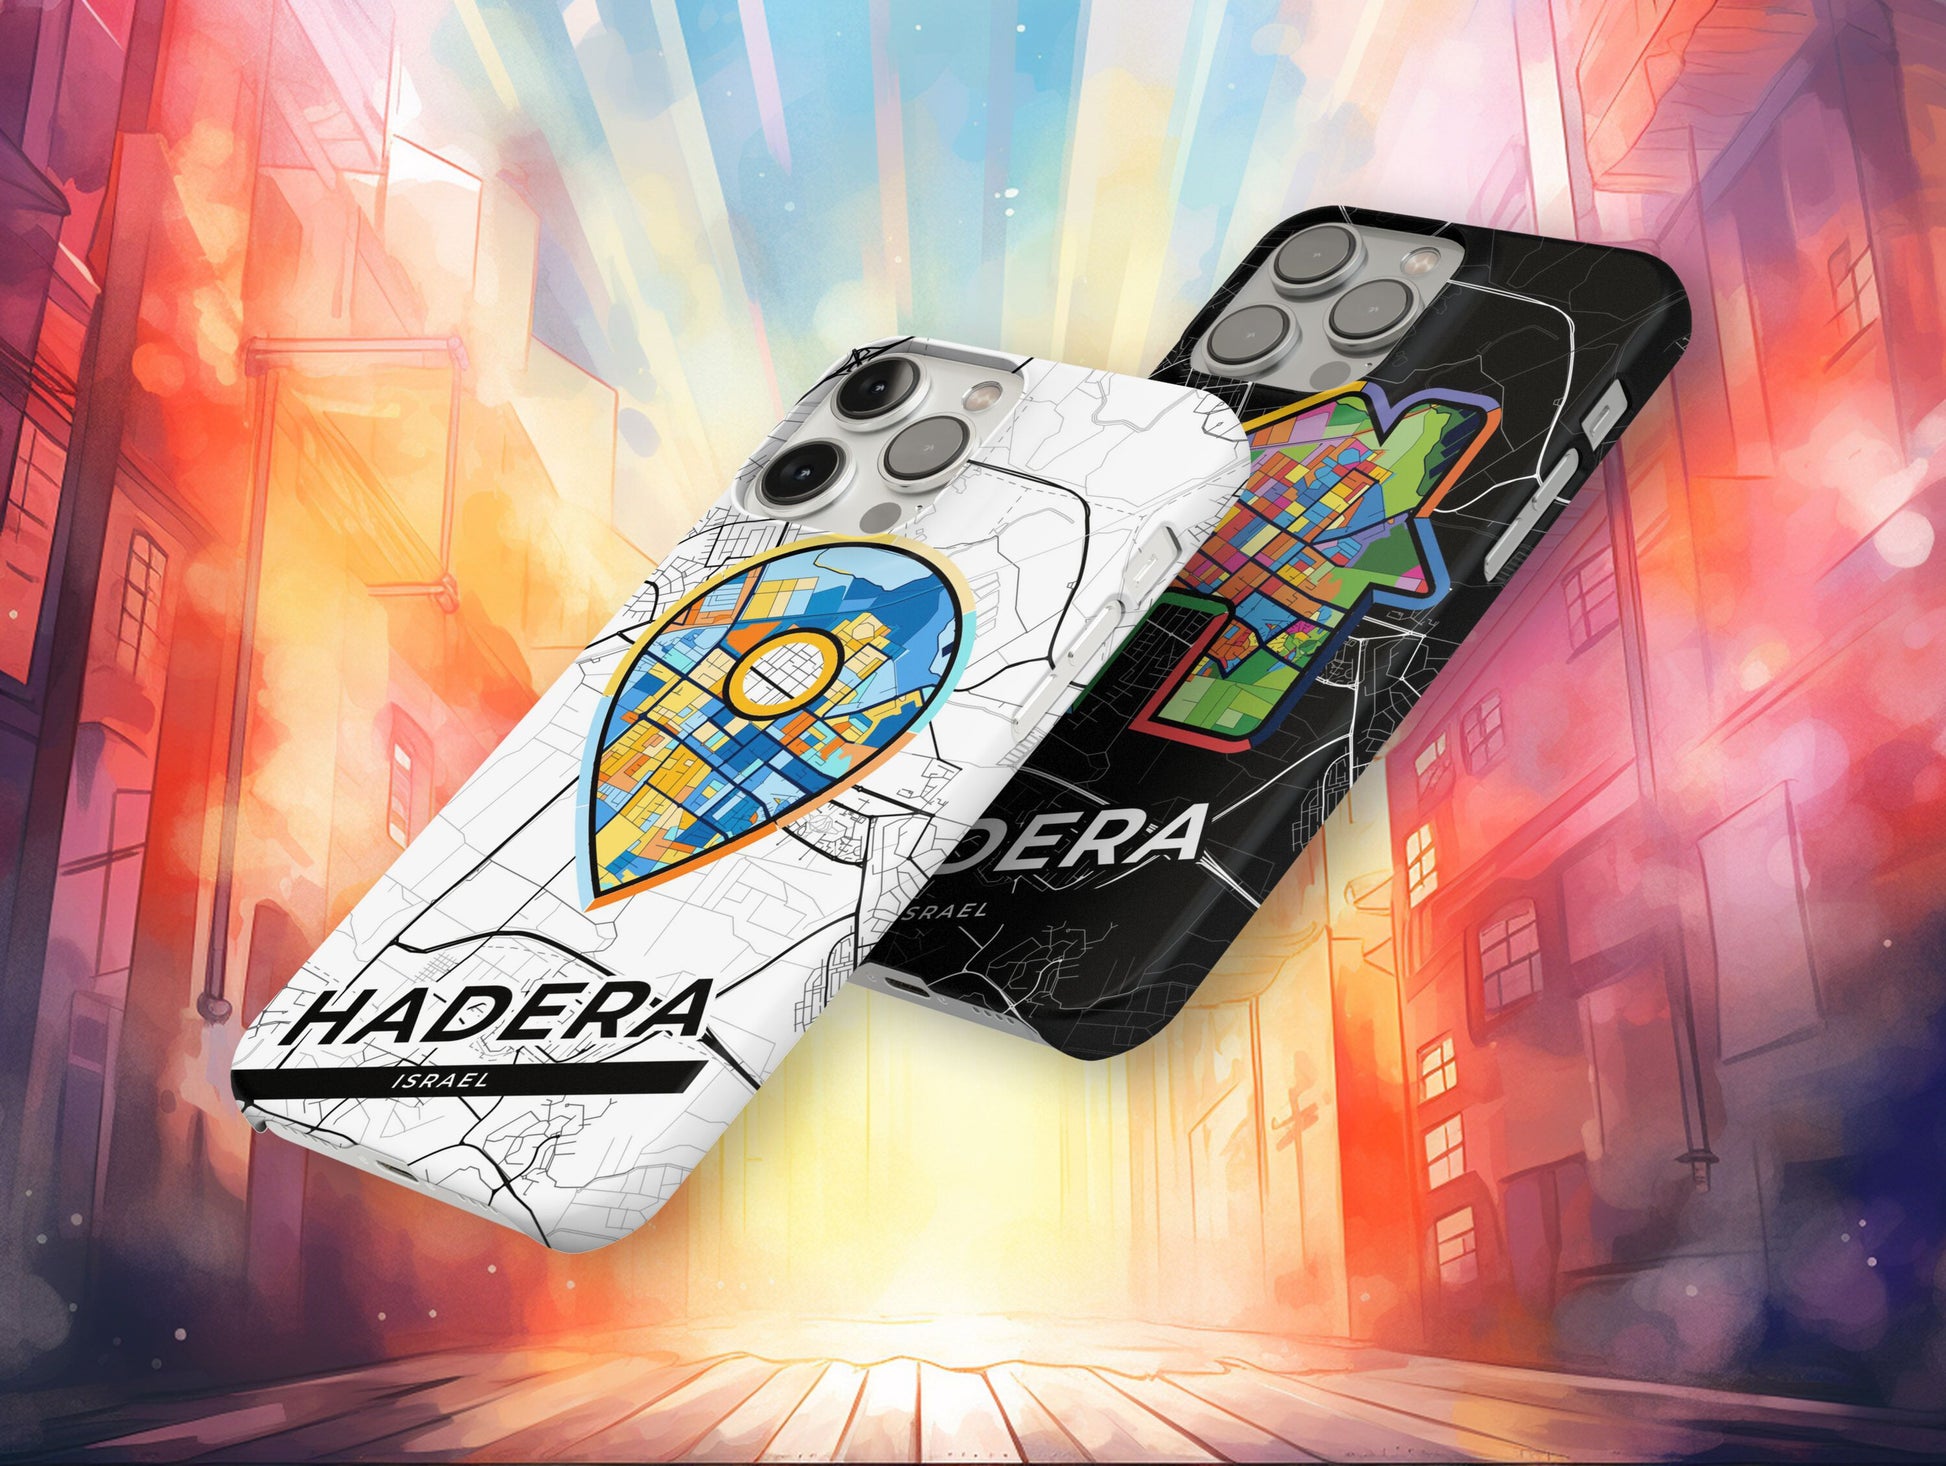 Hadera Israel slim phone case with colorful icon. Birthday, wedding or housewarming gift. Couple match cases.